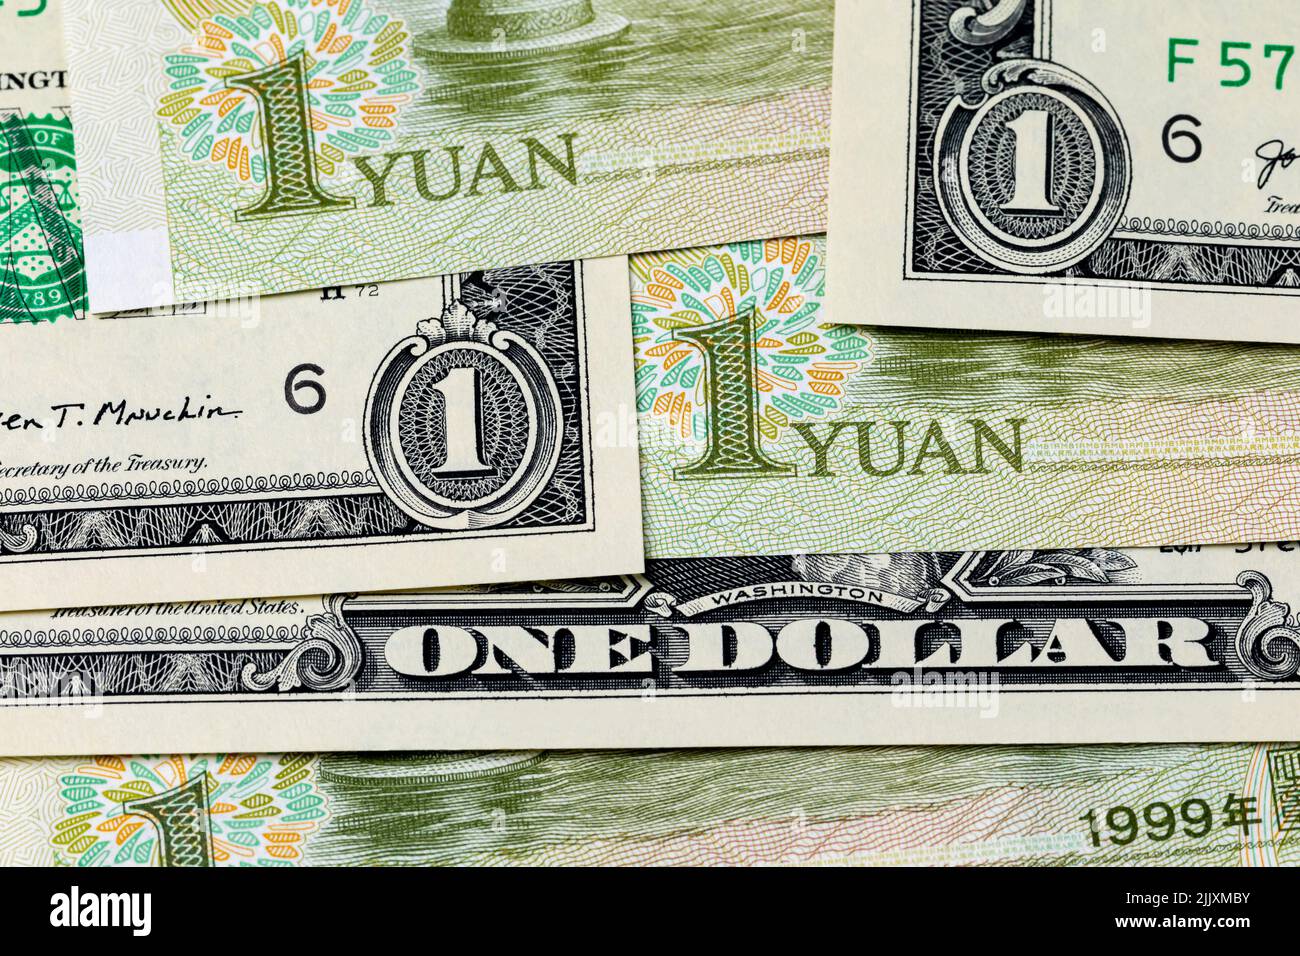 U.S. dollar bills and China Yuan banknote. Currency exchange rate, trade and economy concept. Stock Photo